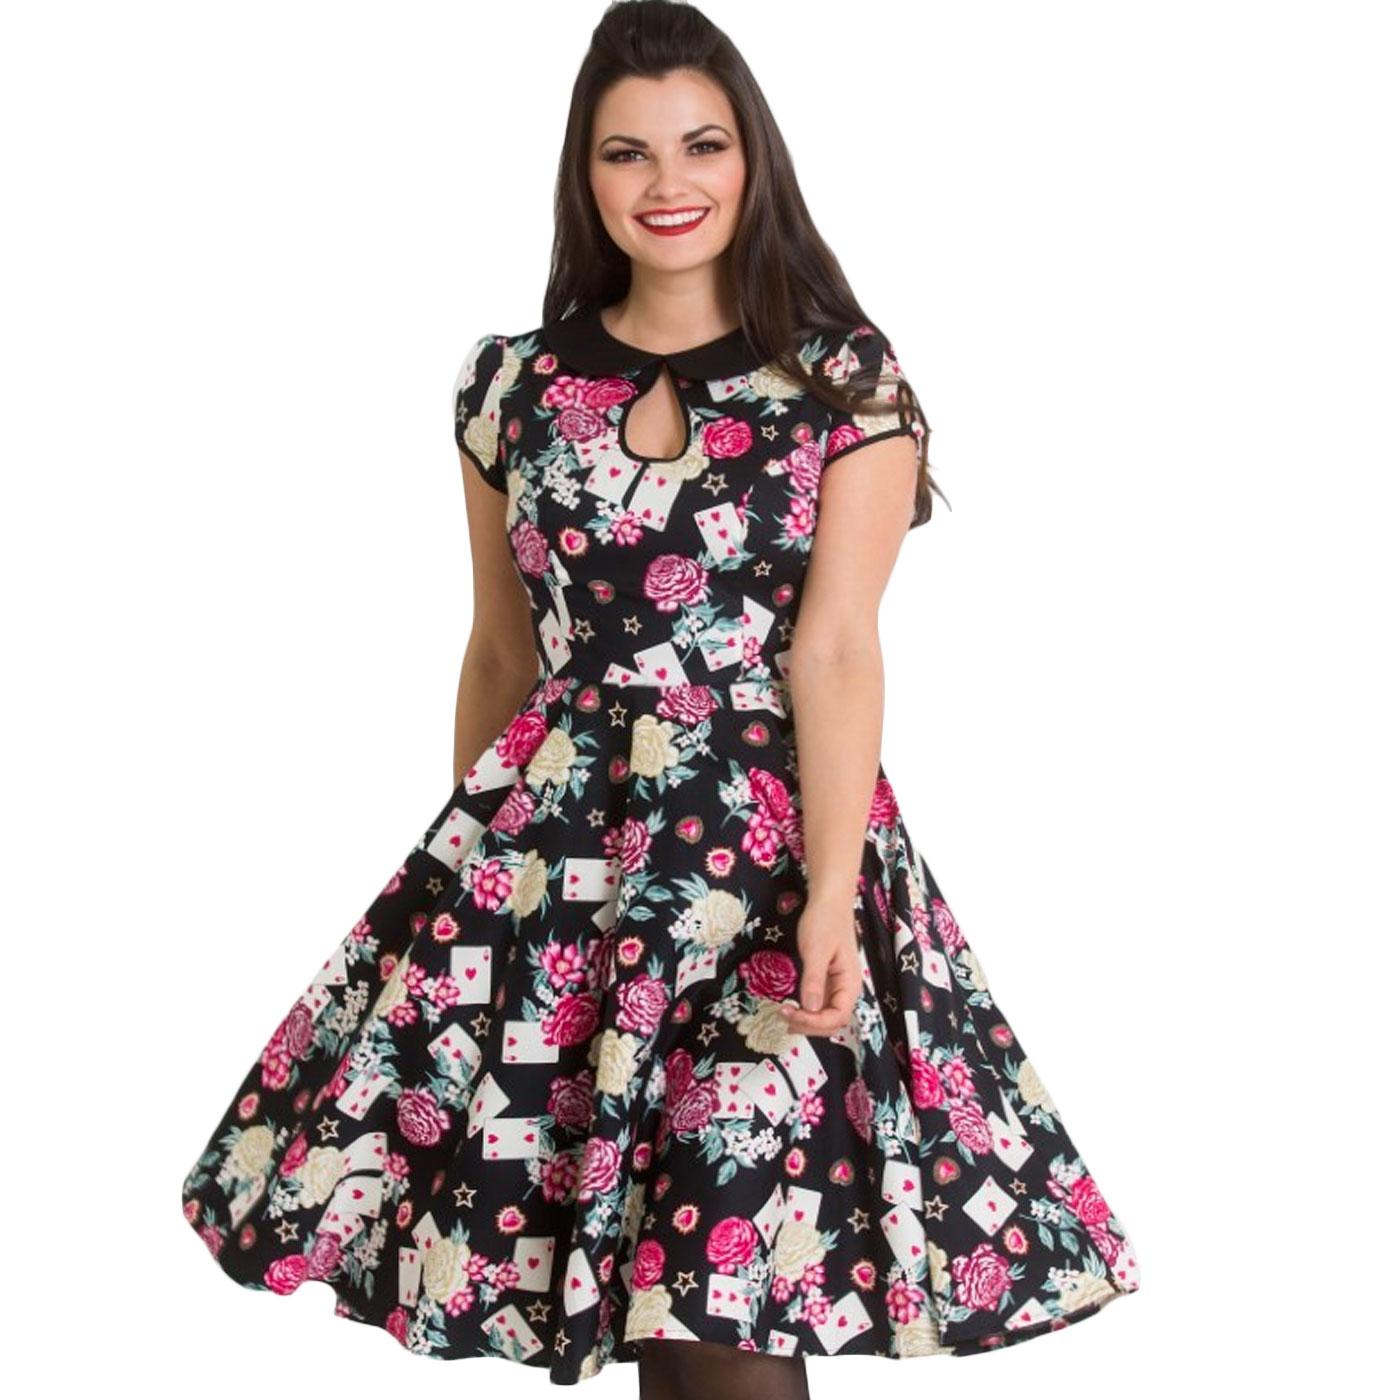 HELL BUNNY Queen Of Hearts Vintage Printed Floral 50s Dress